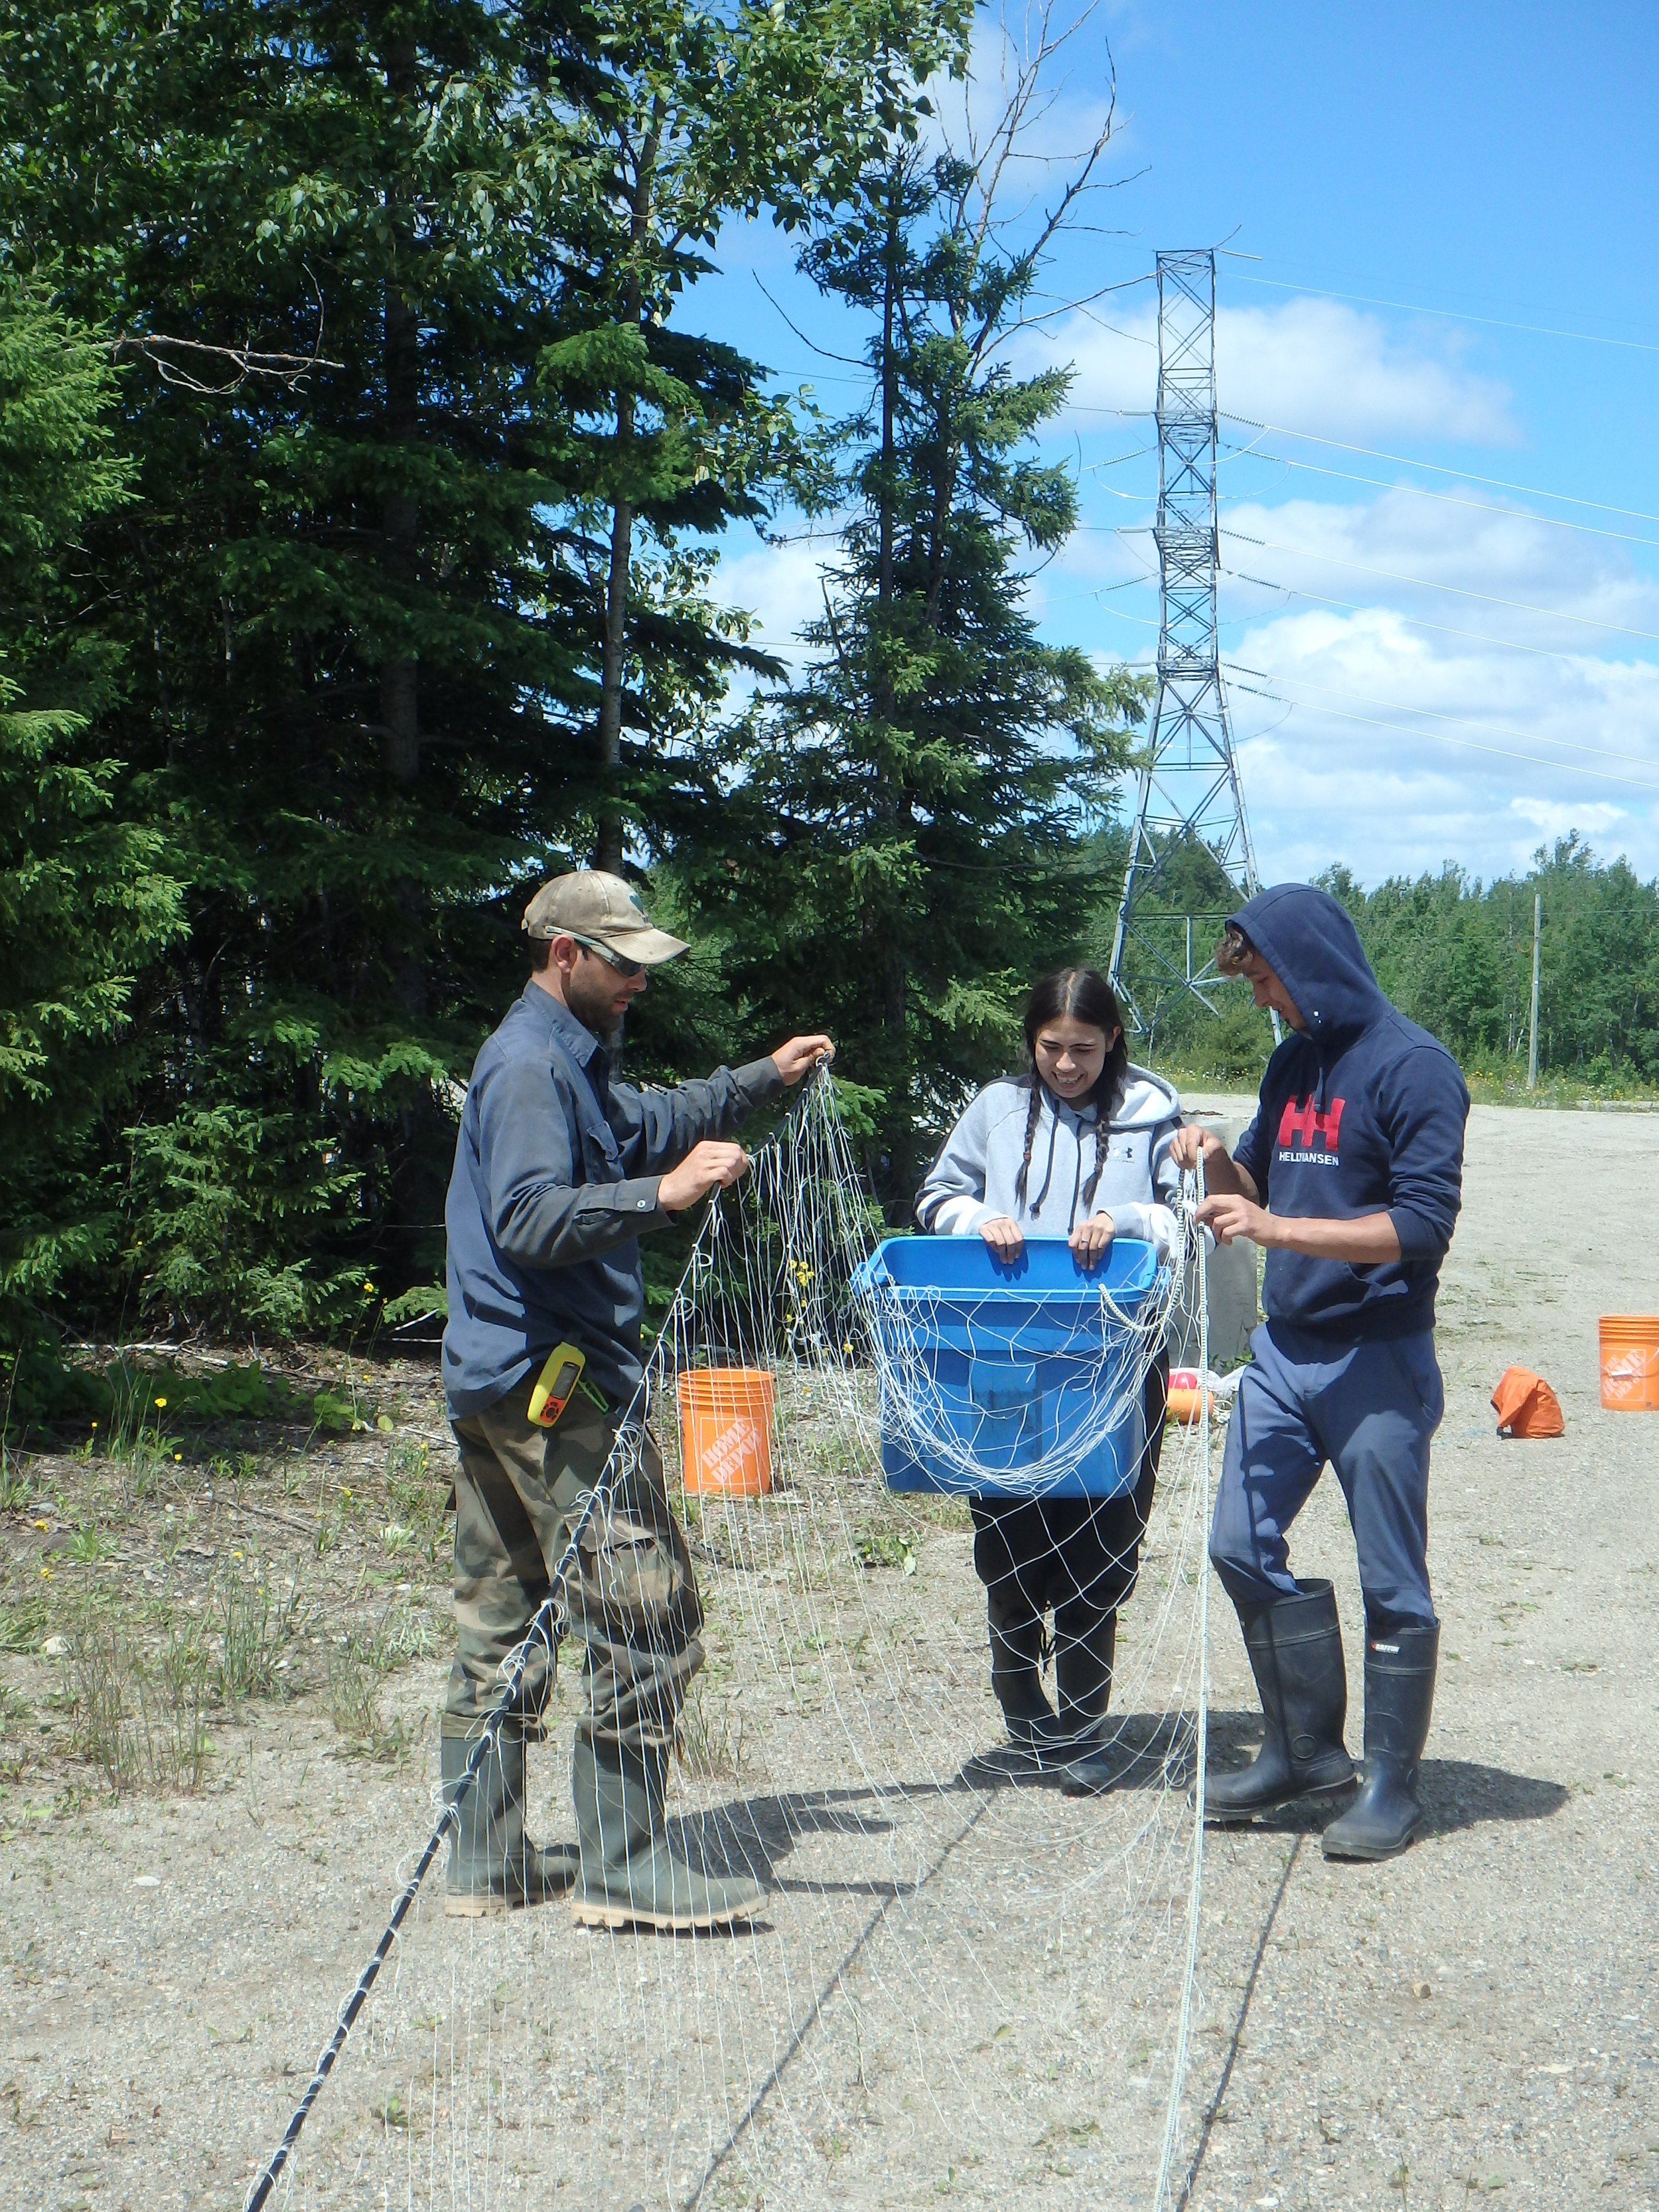 Jacob Seguin (WCS Canada, left), Ocean Skye Phillips (MCFN youth, center), and Justin Simard (MCFN youth, right) prepare a net together.